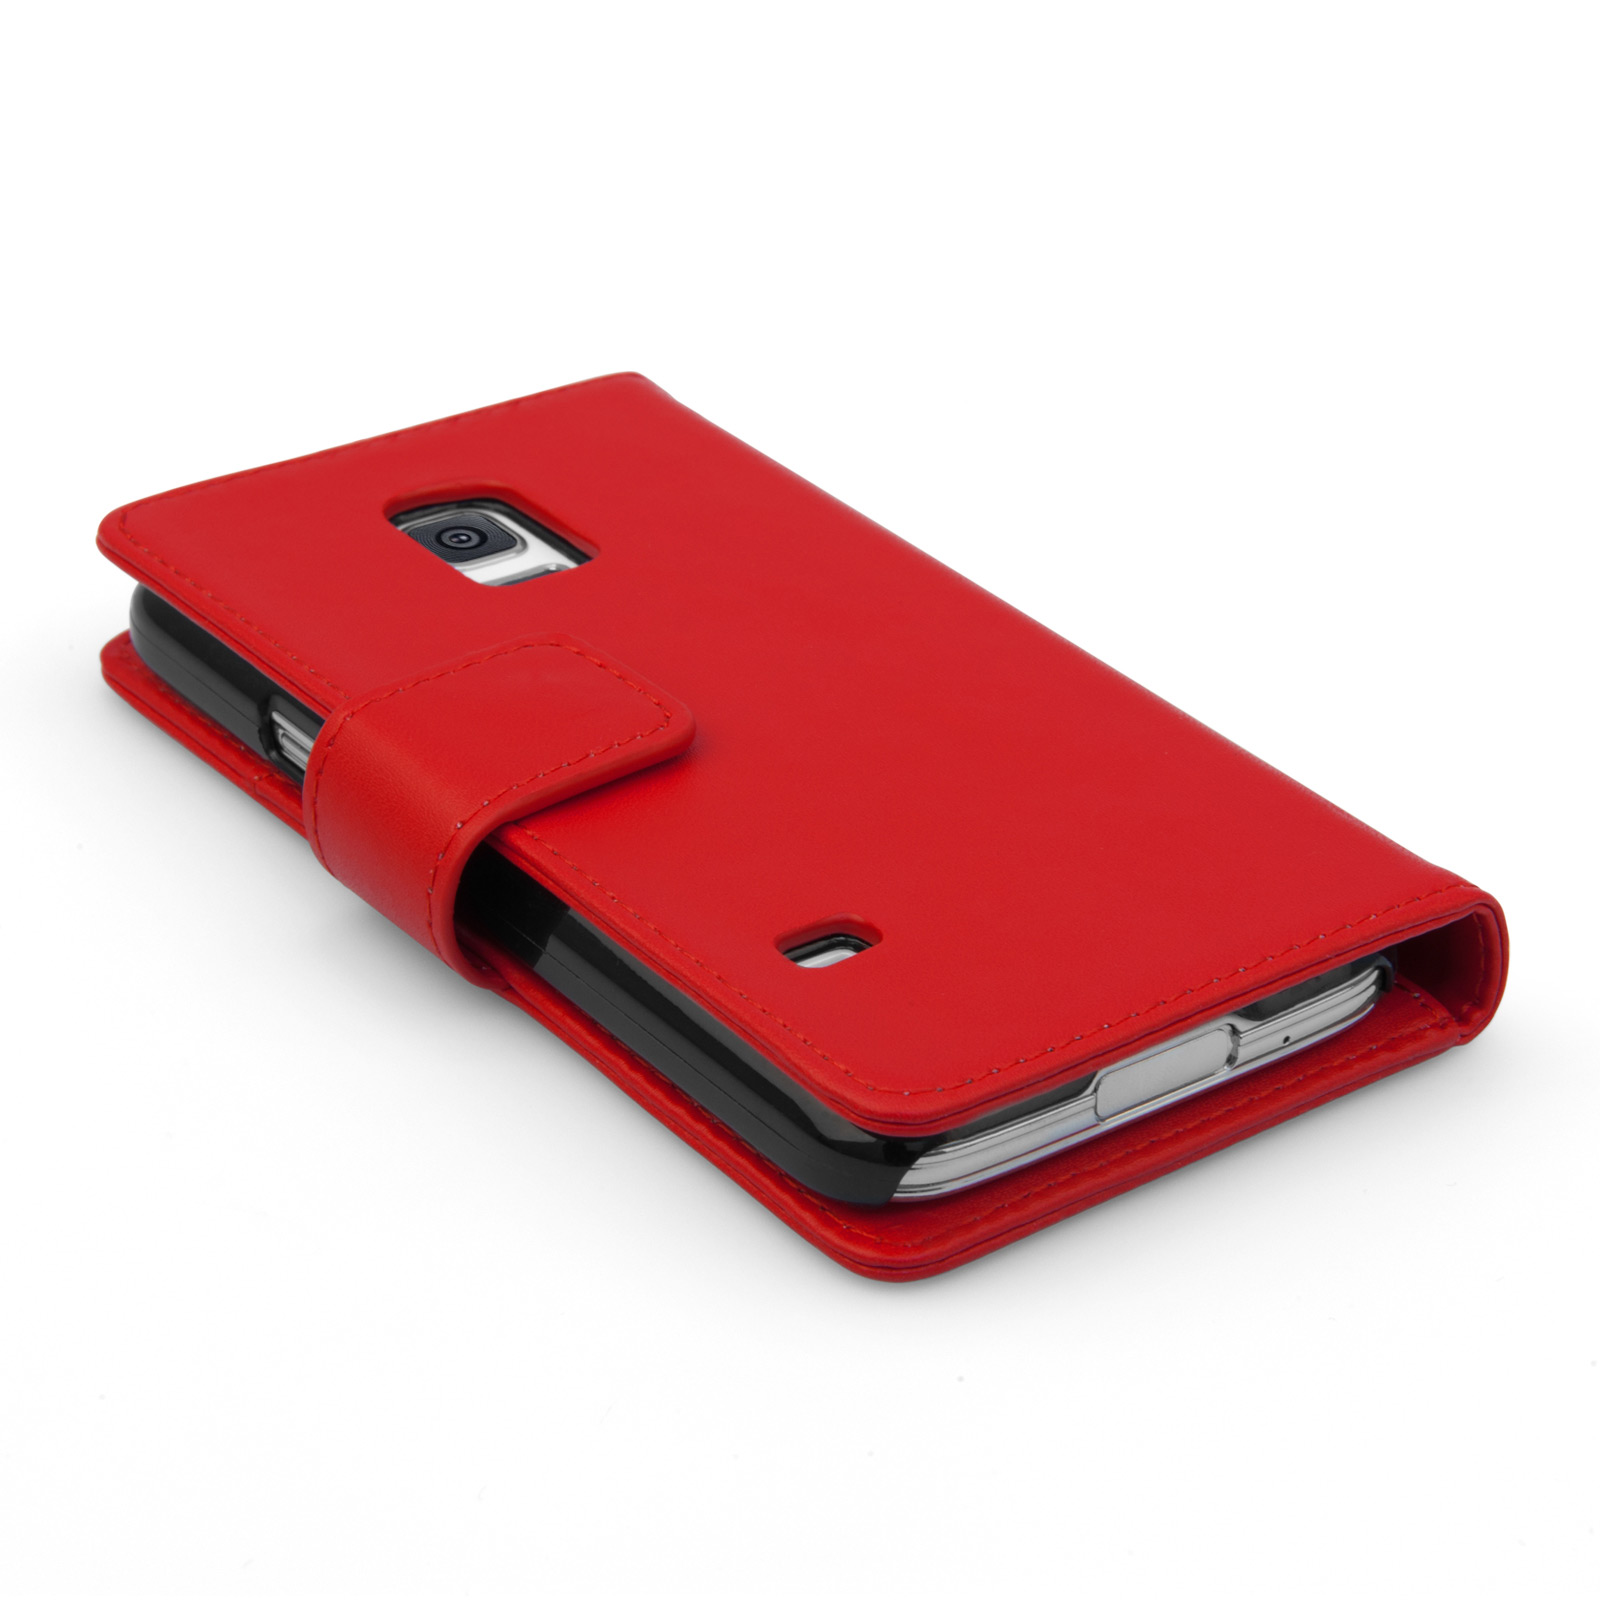 YouSave Samsung Galaxy S5 Mini Leather-Effect Wallet Case - Red